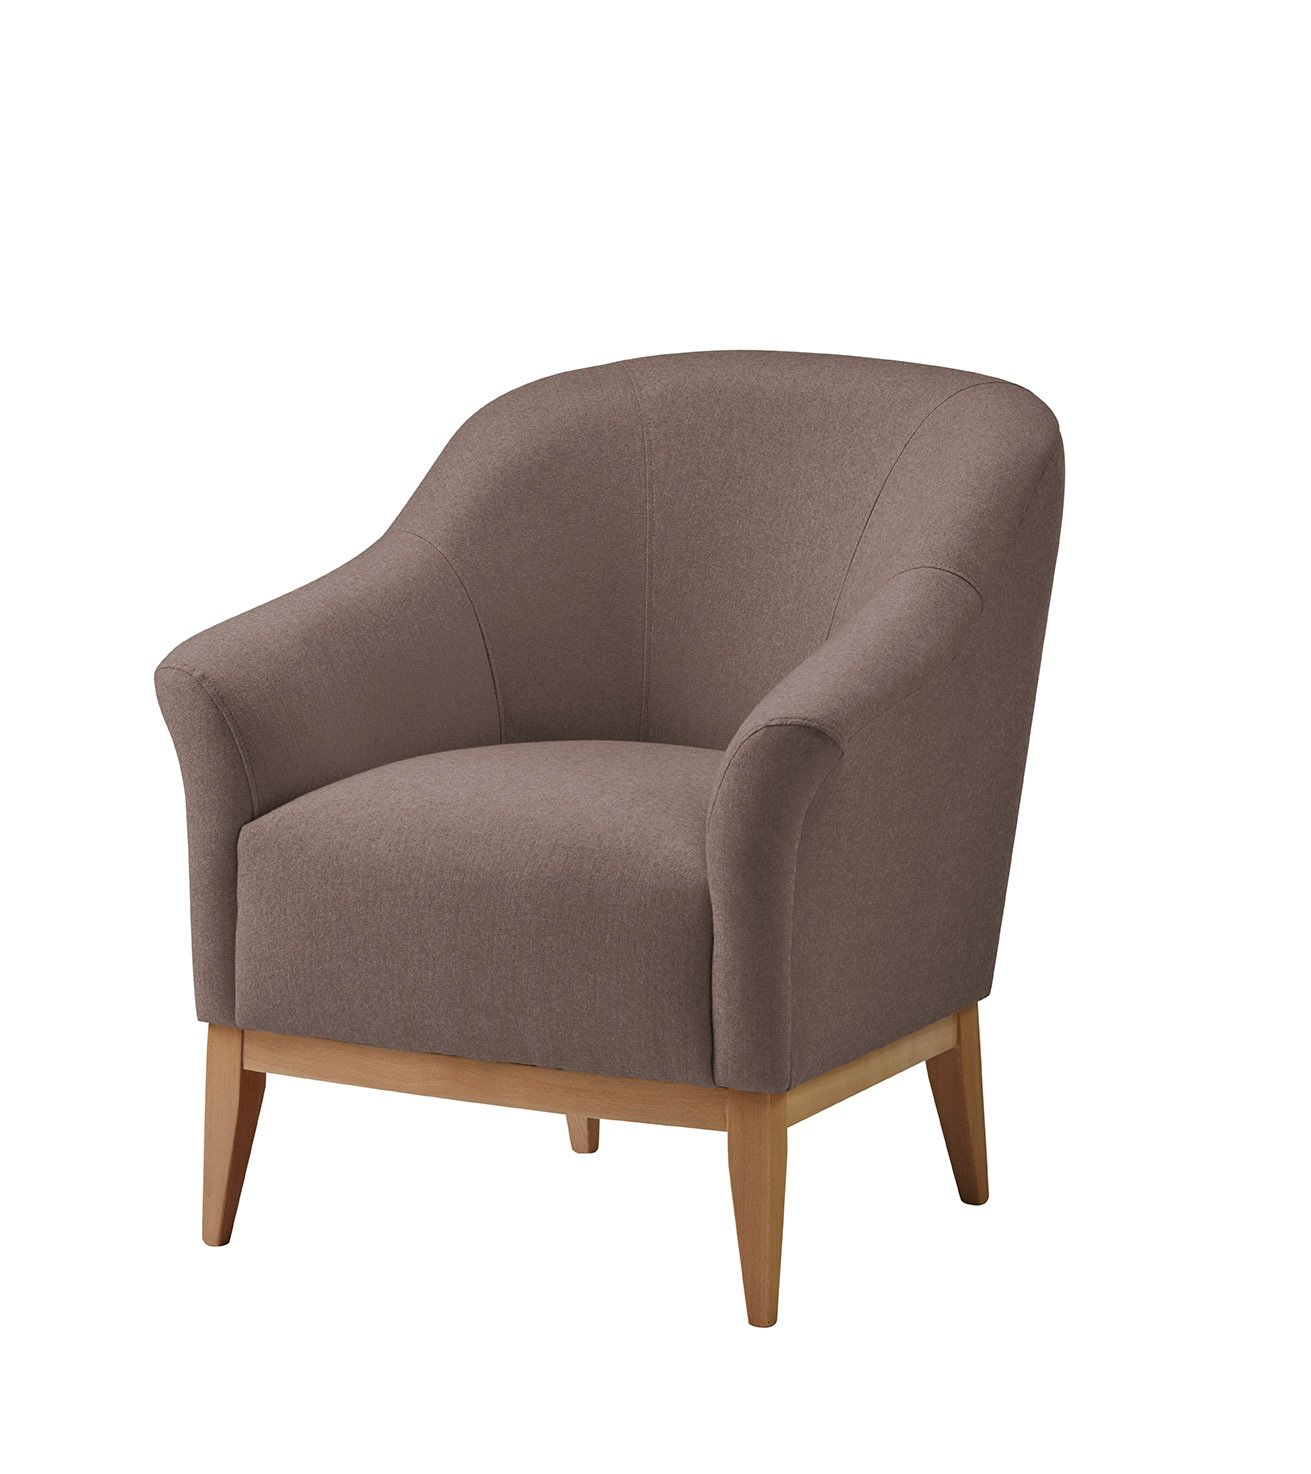 Horley low back chair - Shackletons